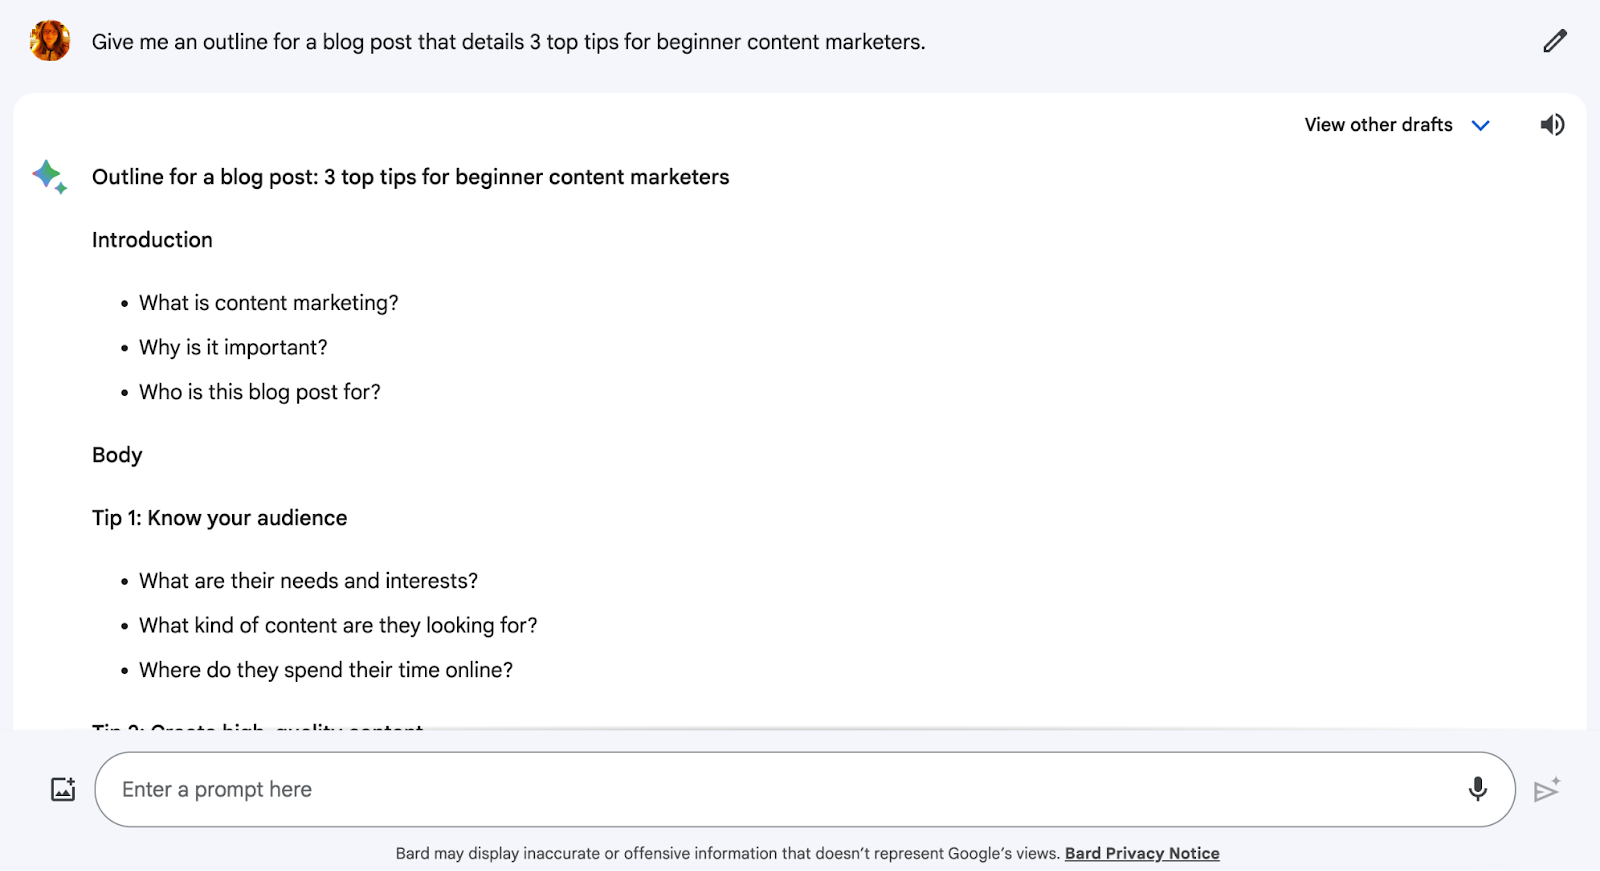 Bard's response to "Give me an outline for a blog post that details 3 top tips for beginner content marketers." query